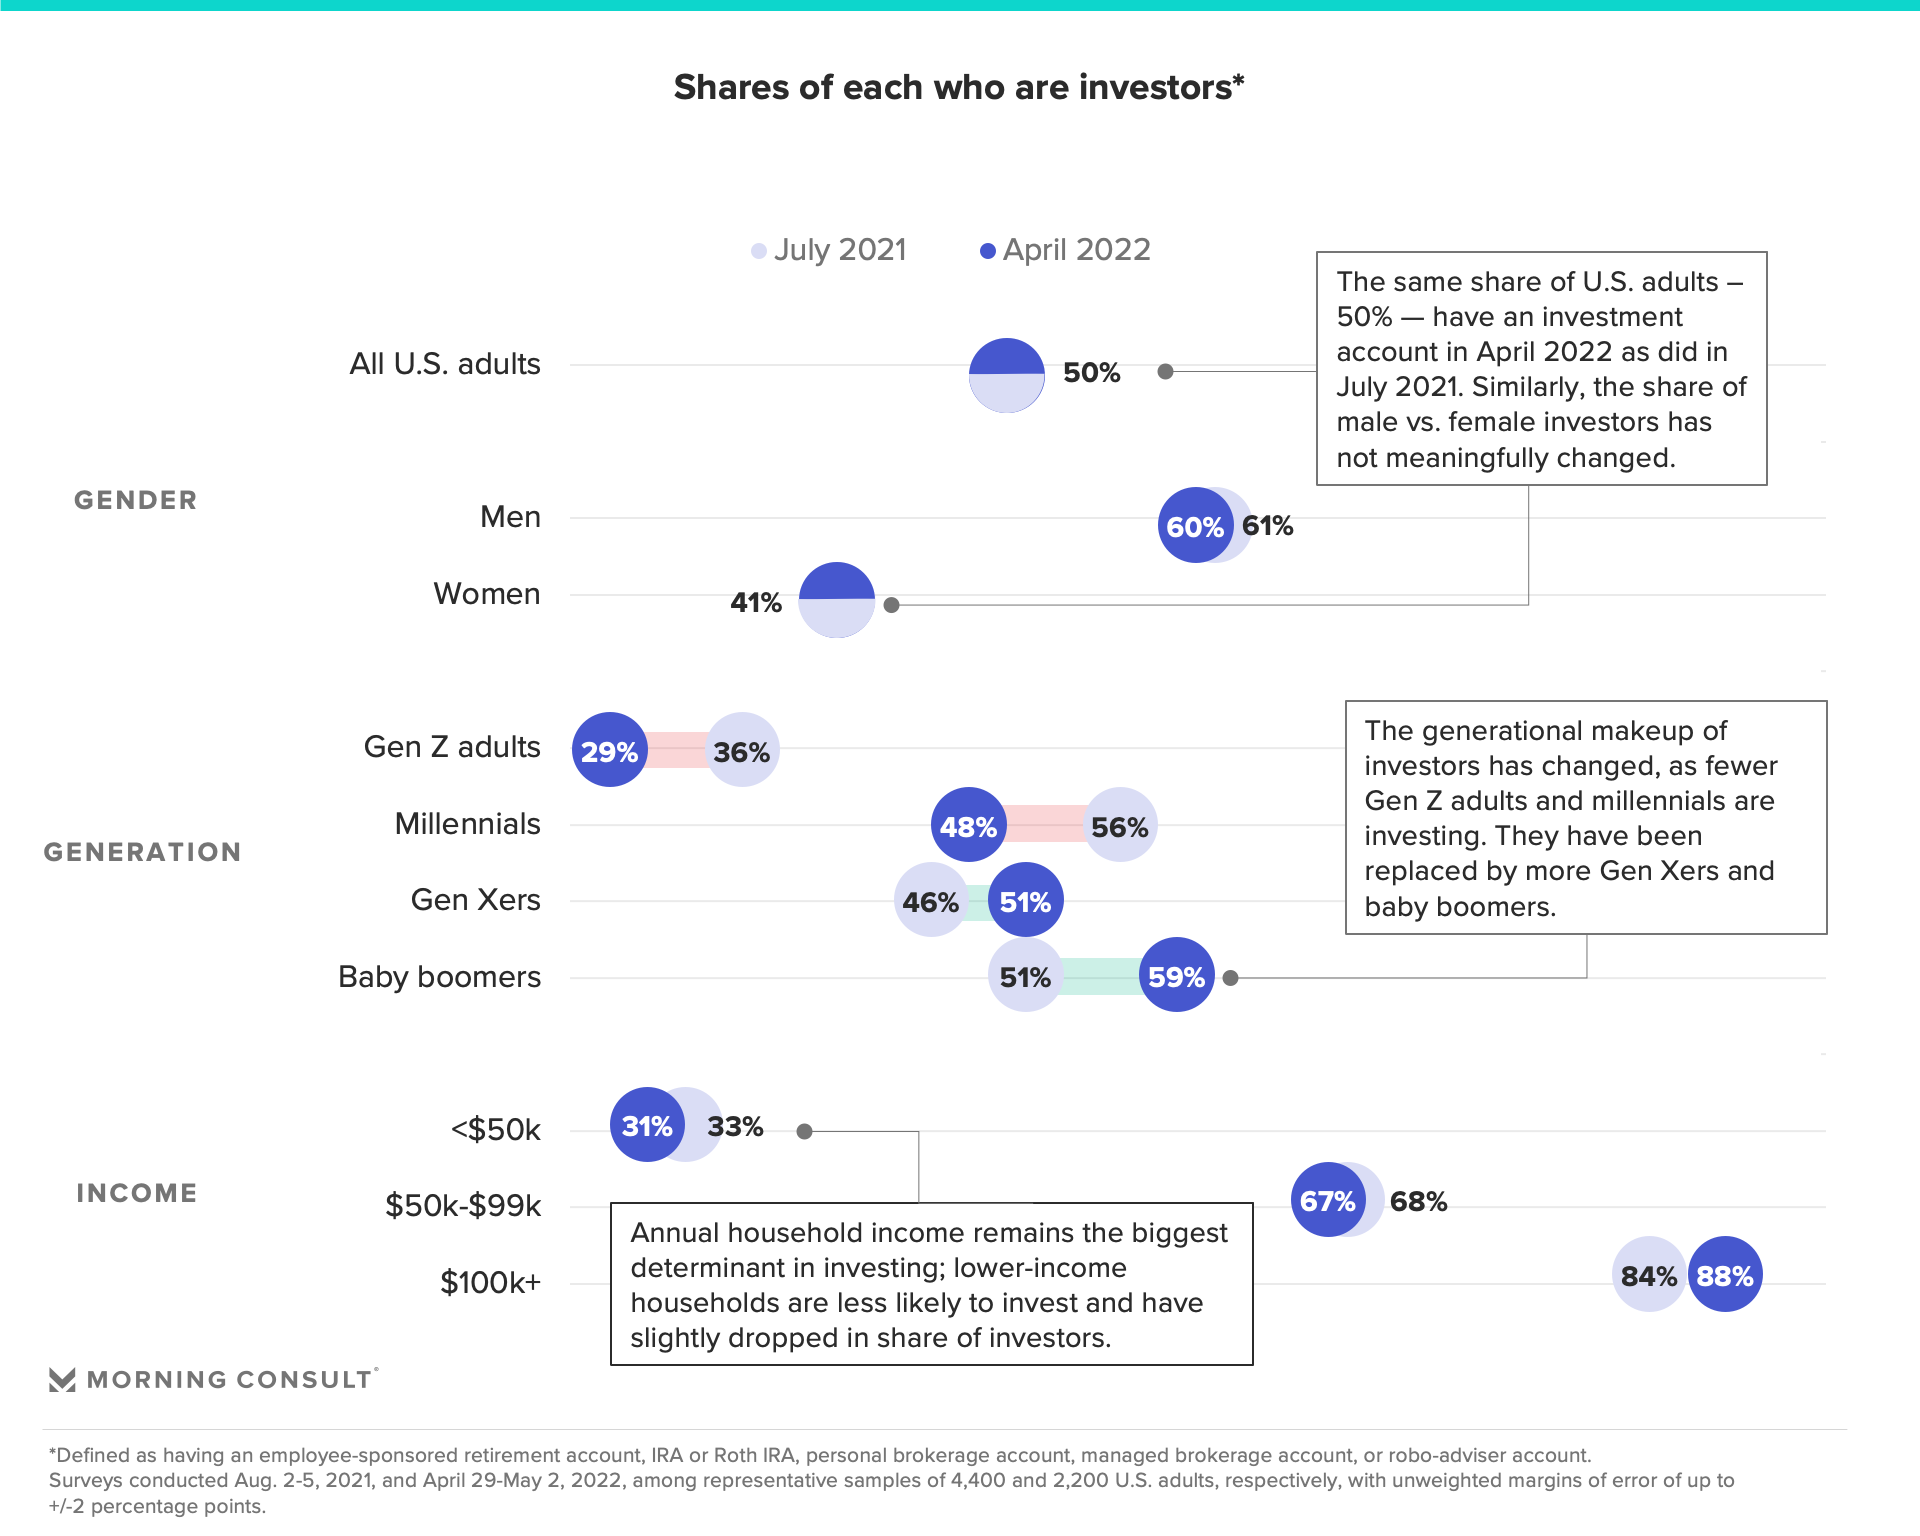 Chart showing share of U.S. adults who are investors in 2021 and 2022 by gender, generation and income